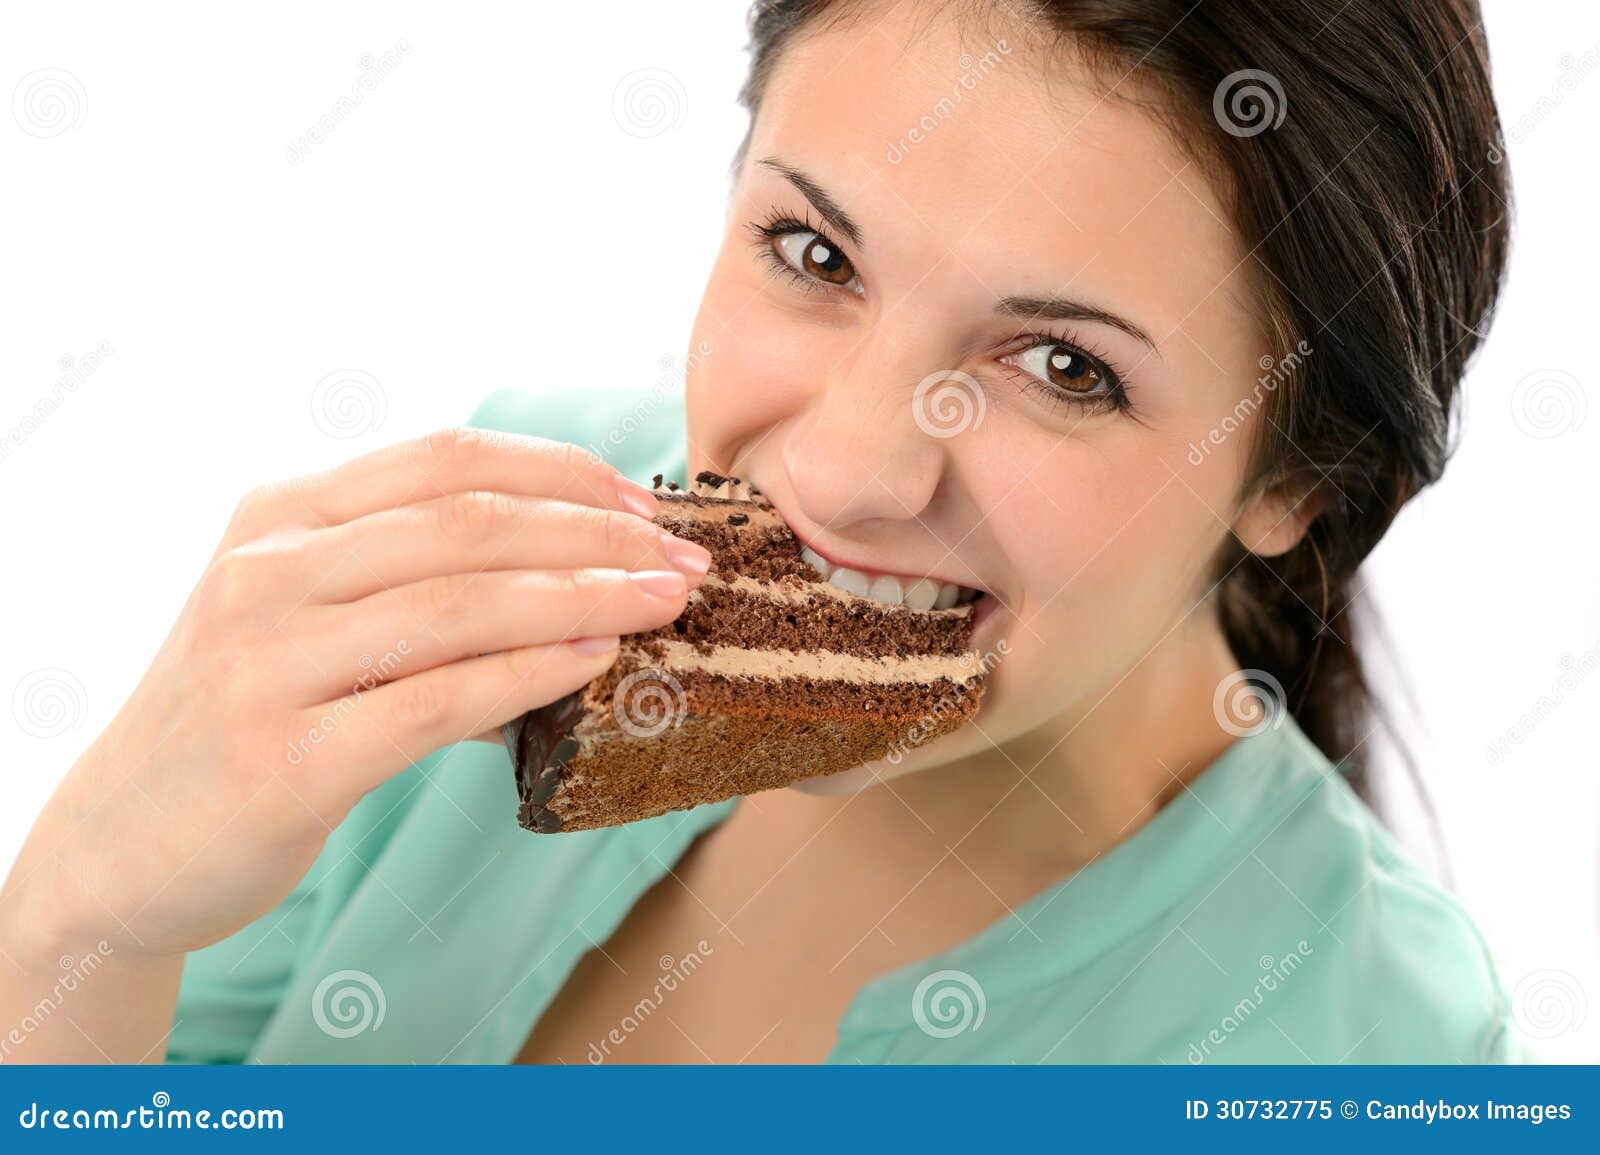 greedy young woman eating tasty cake